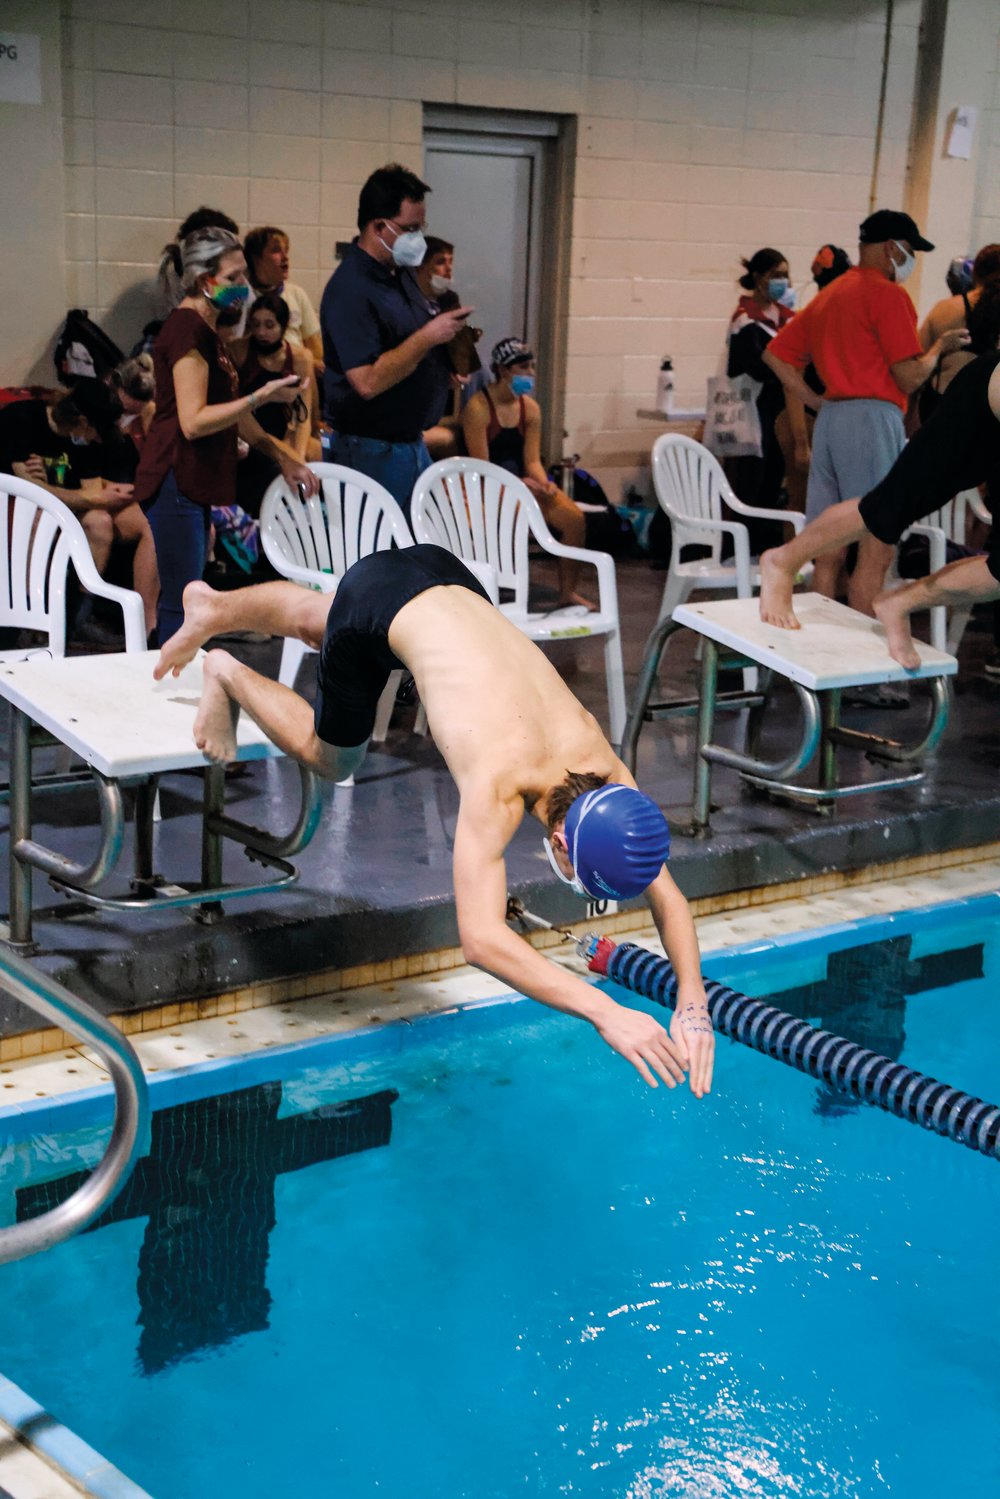 Jordan-Matthews junior Weldon Thornton dives into the pool at the start of one of his two freestyle races at a swim meet in Asheboro last Thursday. Thornton finished 5th in the men's 400-meter freestyle (8:04.62) and 8th in the men's 200-meter freestyle (4:17.20).